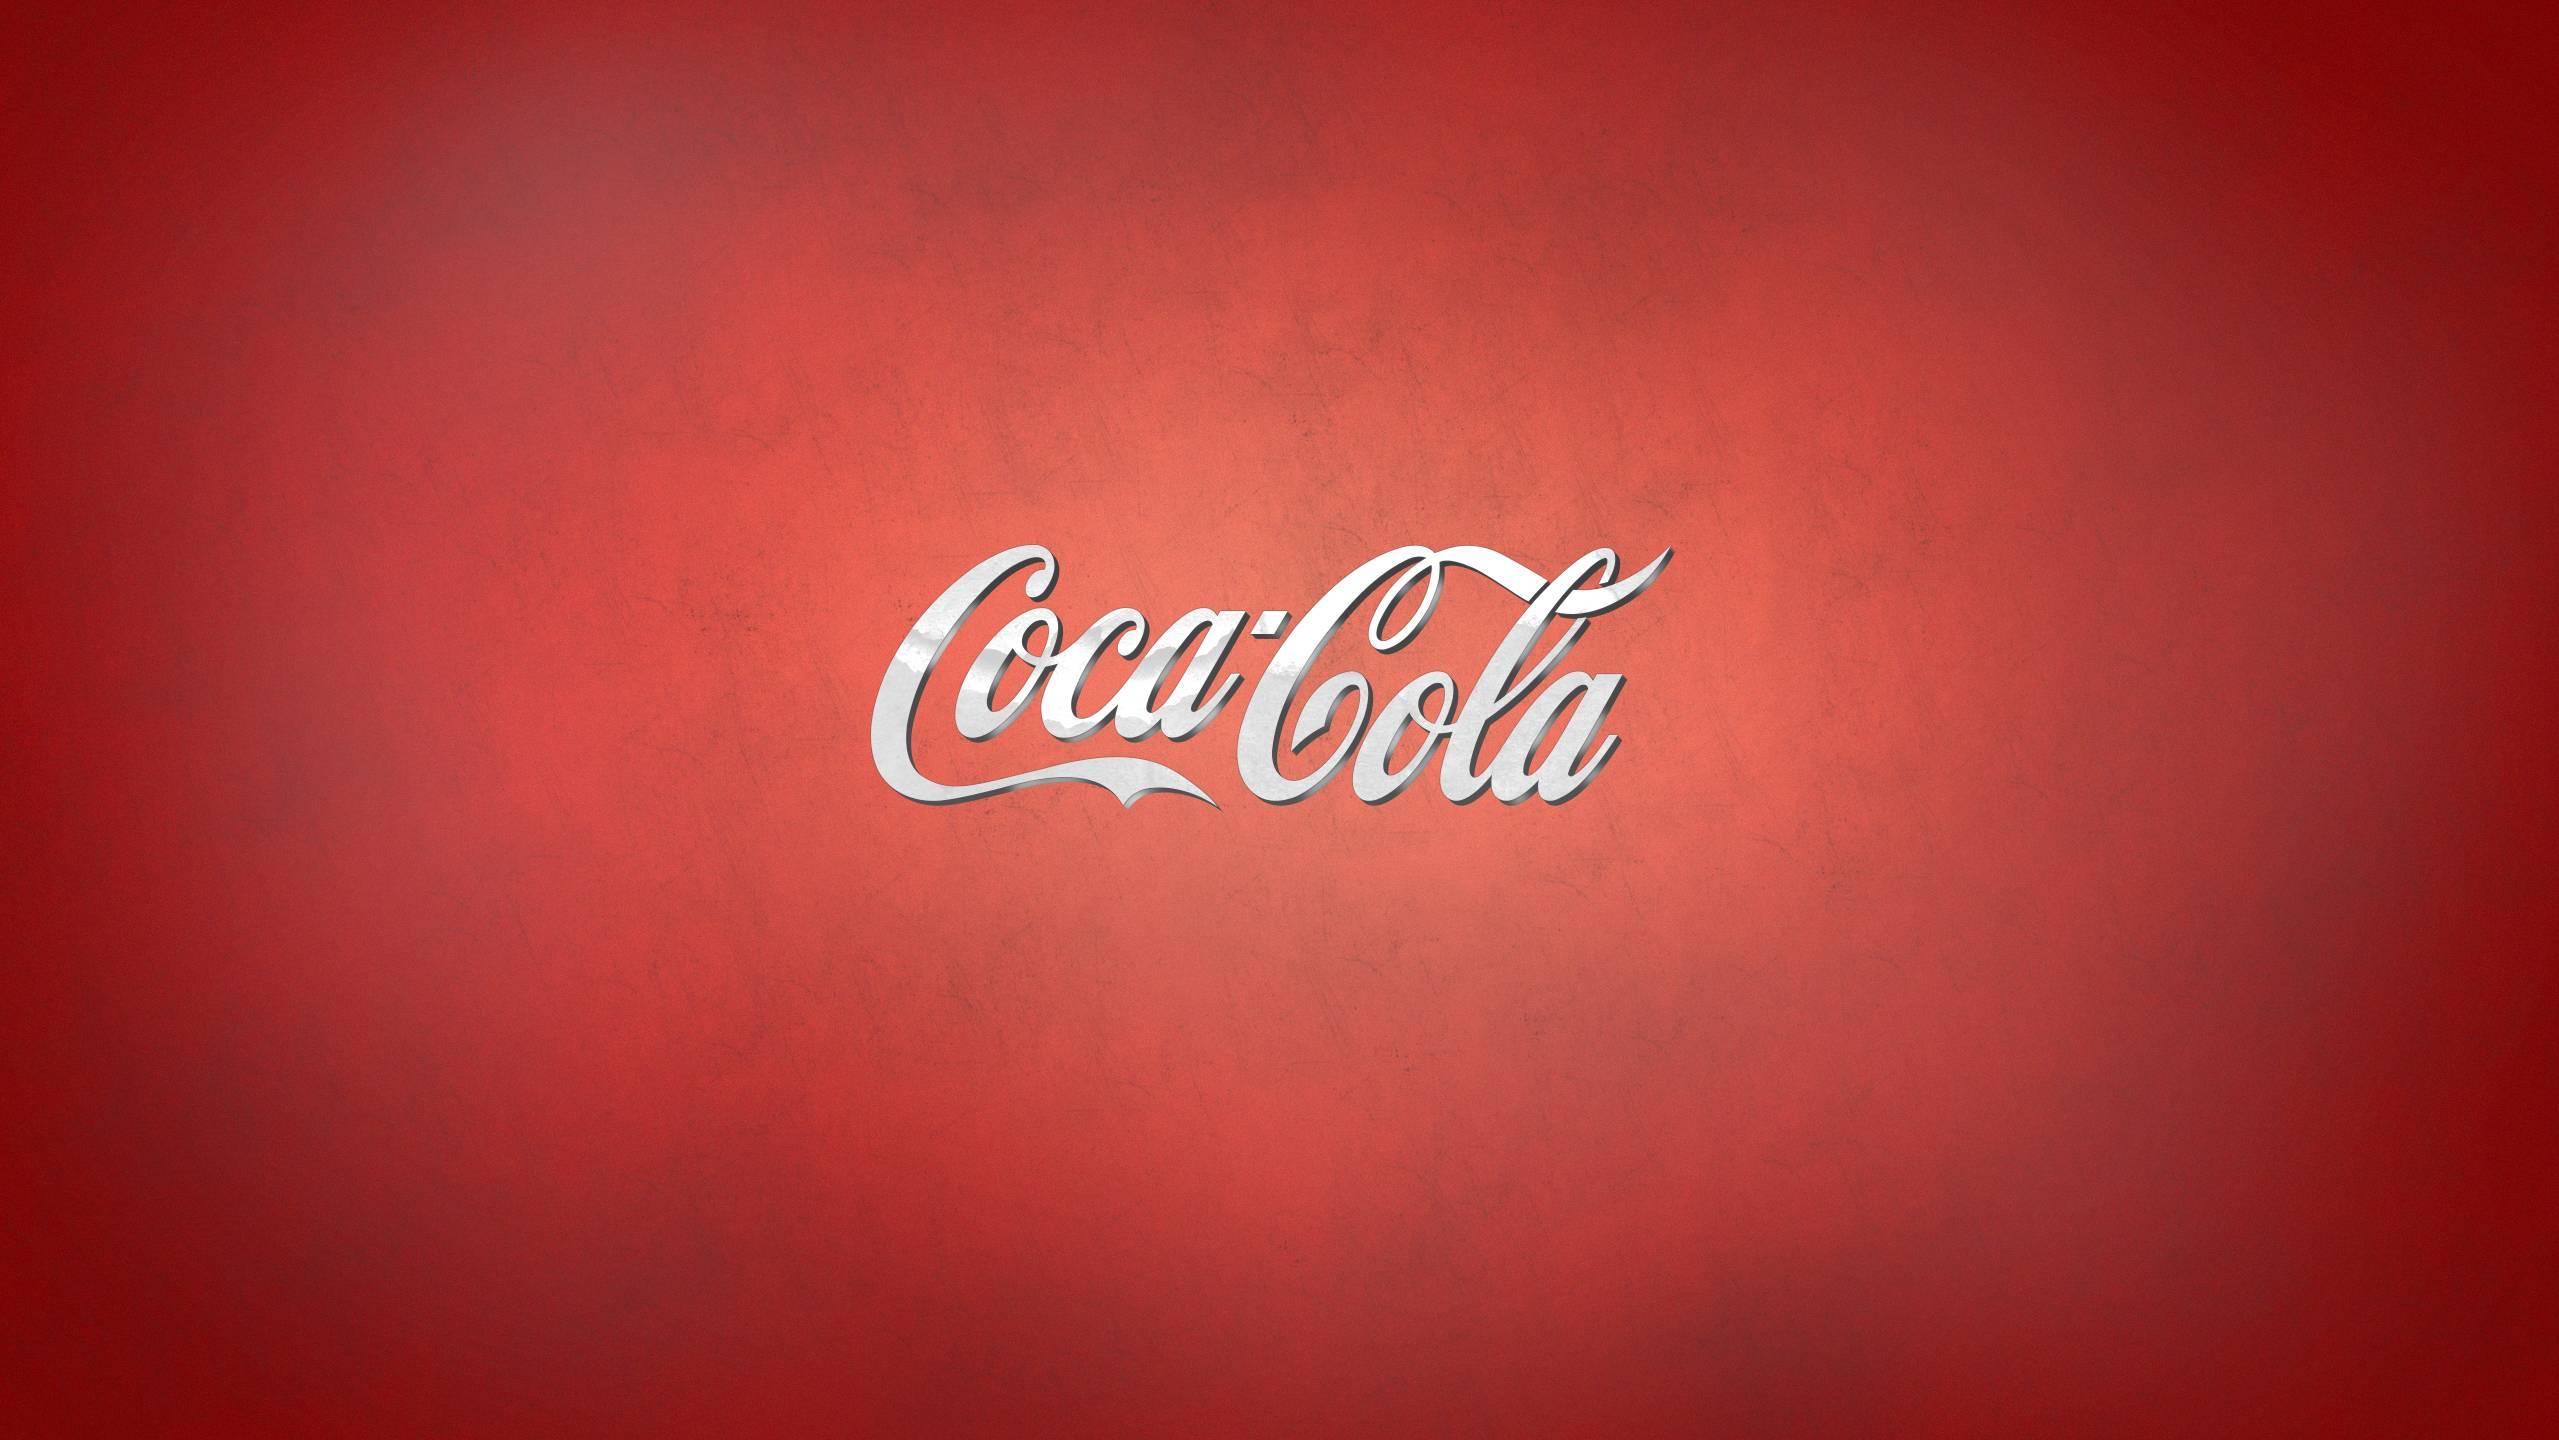 coca cola, brands, logos, background, red Aesthetic wallpaper